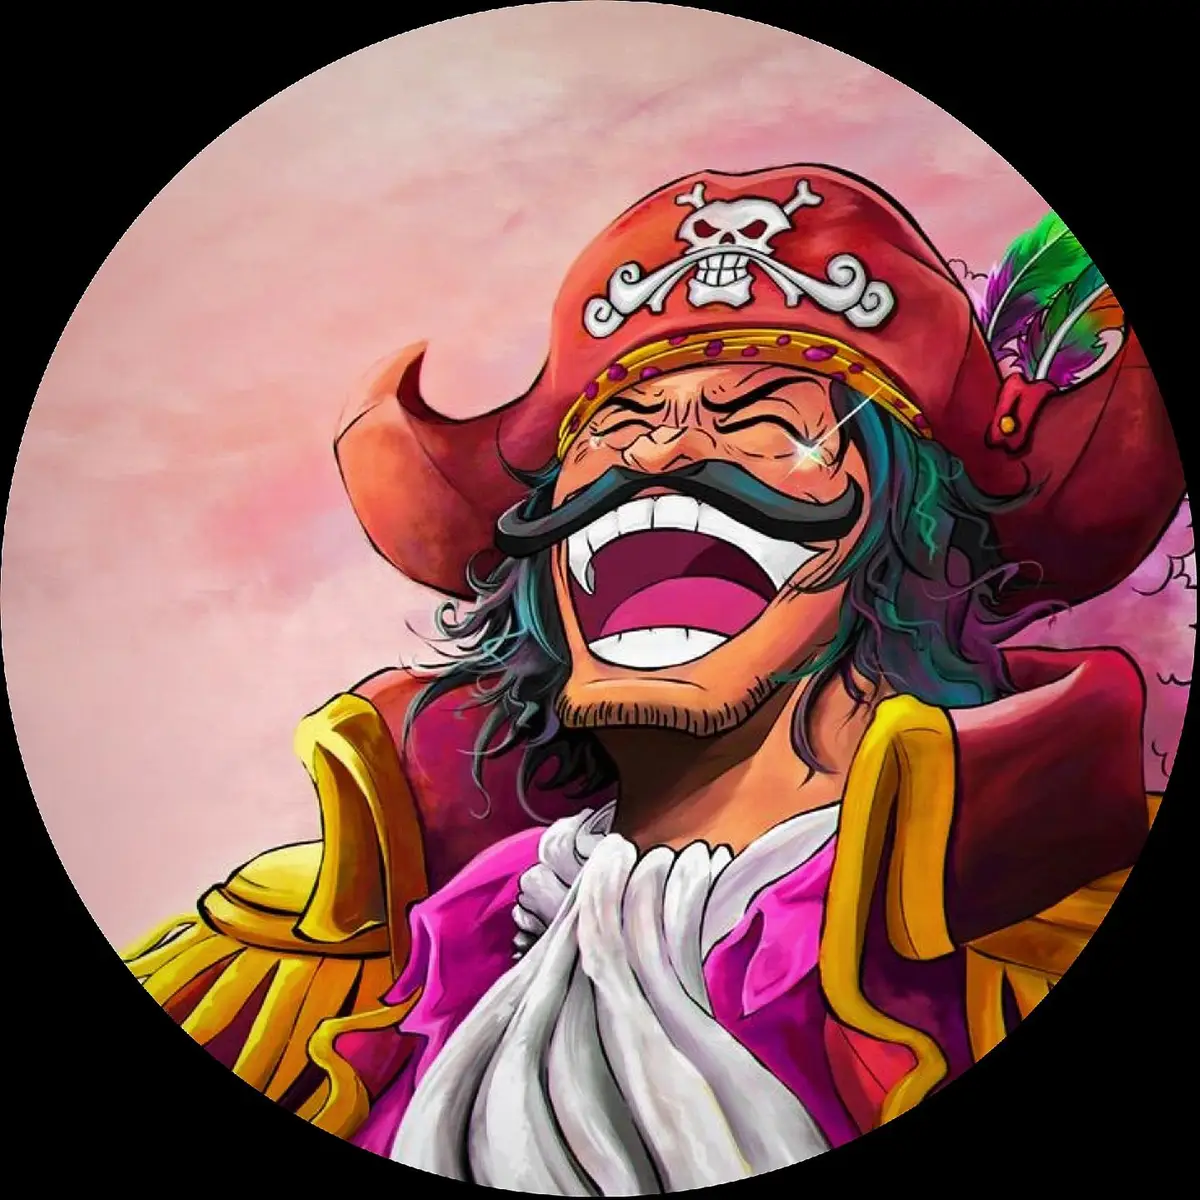 Choose your characters! #wallpaper #wallpapers #profilepics #hd #profileepic #pfp #icons #roundpfps #profilepicsonepiece #anime #onepiece #viral #stongkers #4k #fyp #4kview1 #goviral #blowthisup